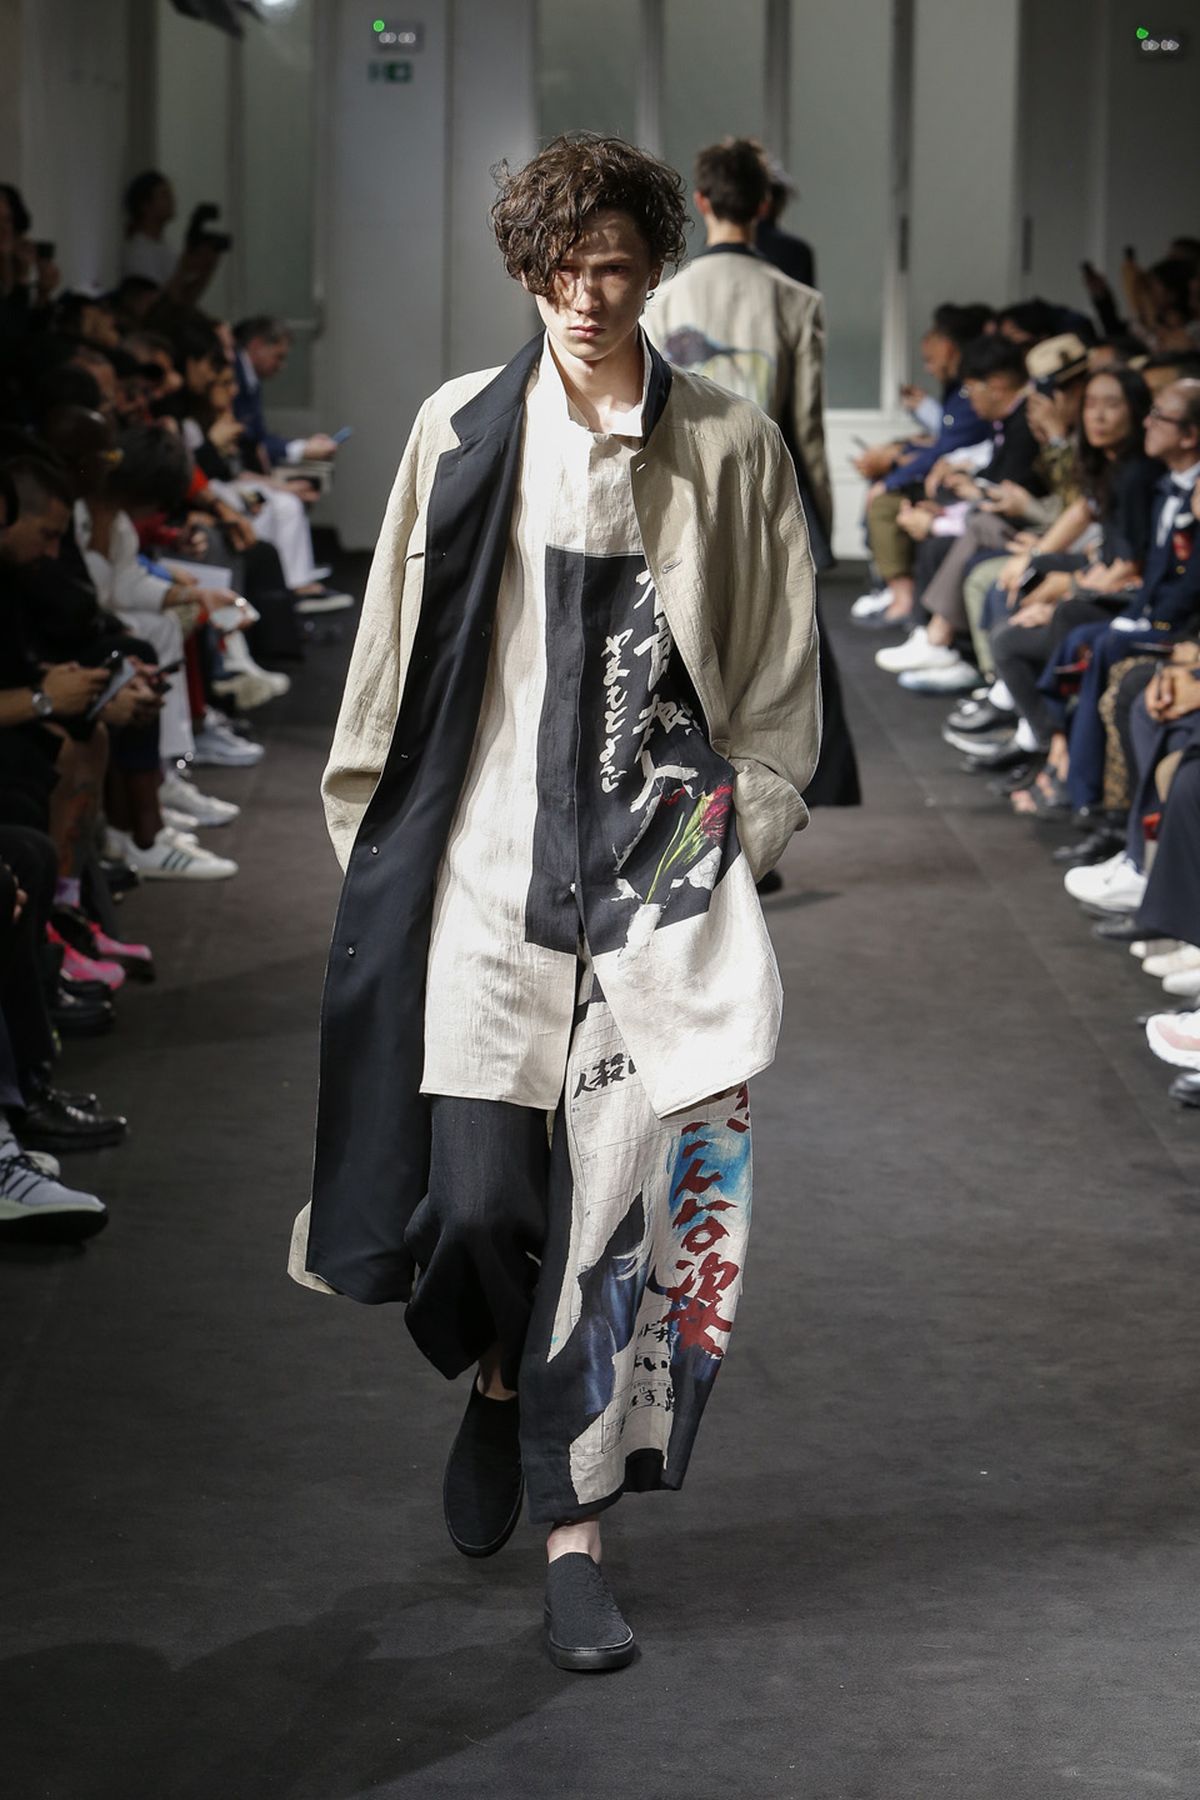 Yohji Yamamoto Presents Eclectic Graphic Tailoring for SS19